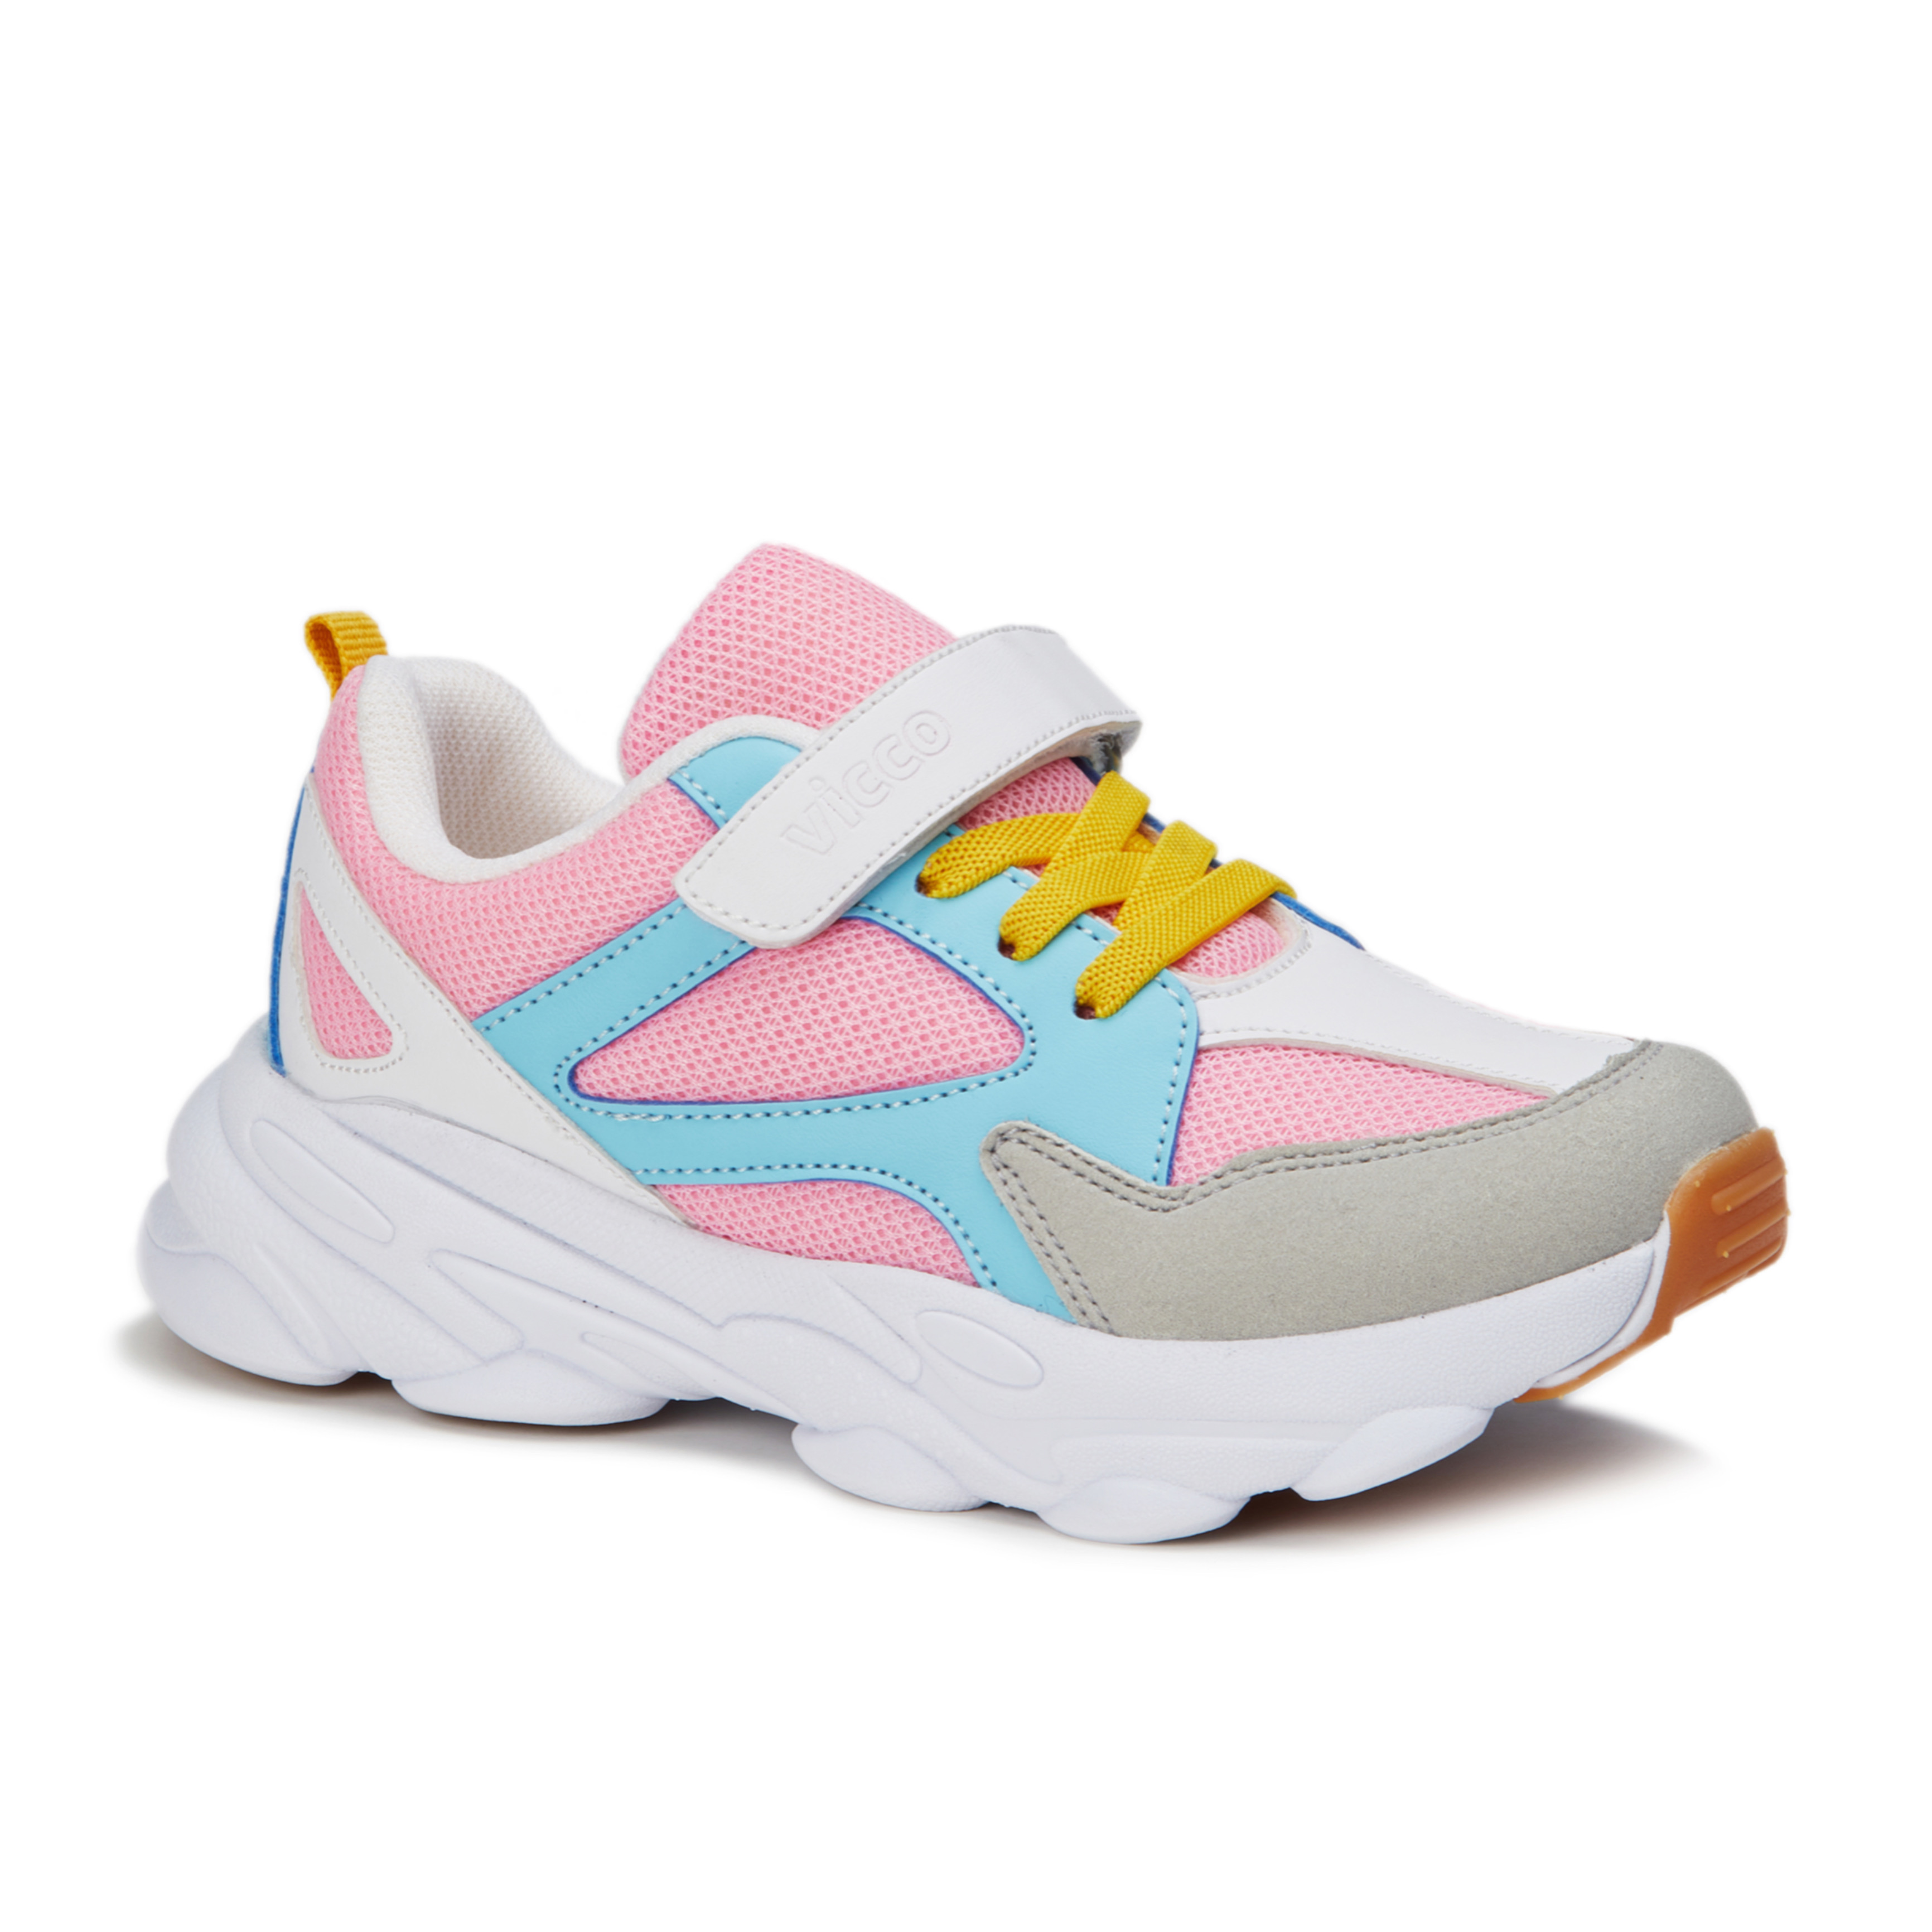 Asimo Pink sneakers for toddlers and big kids